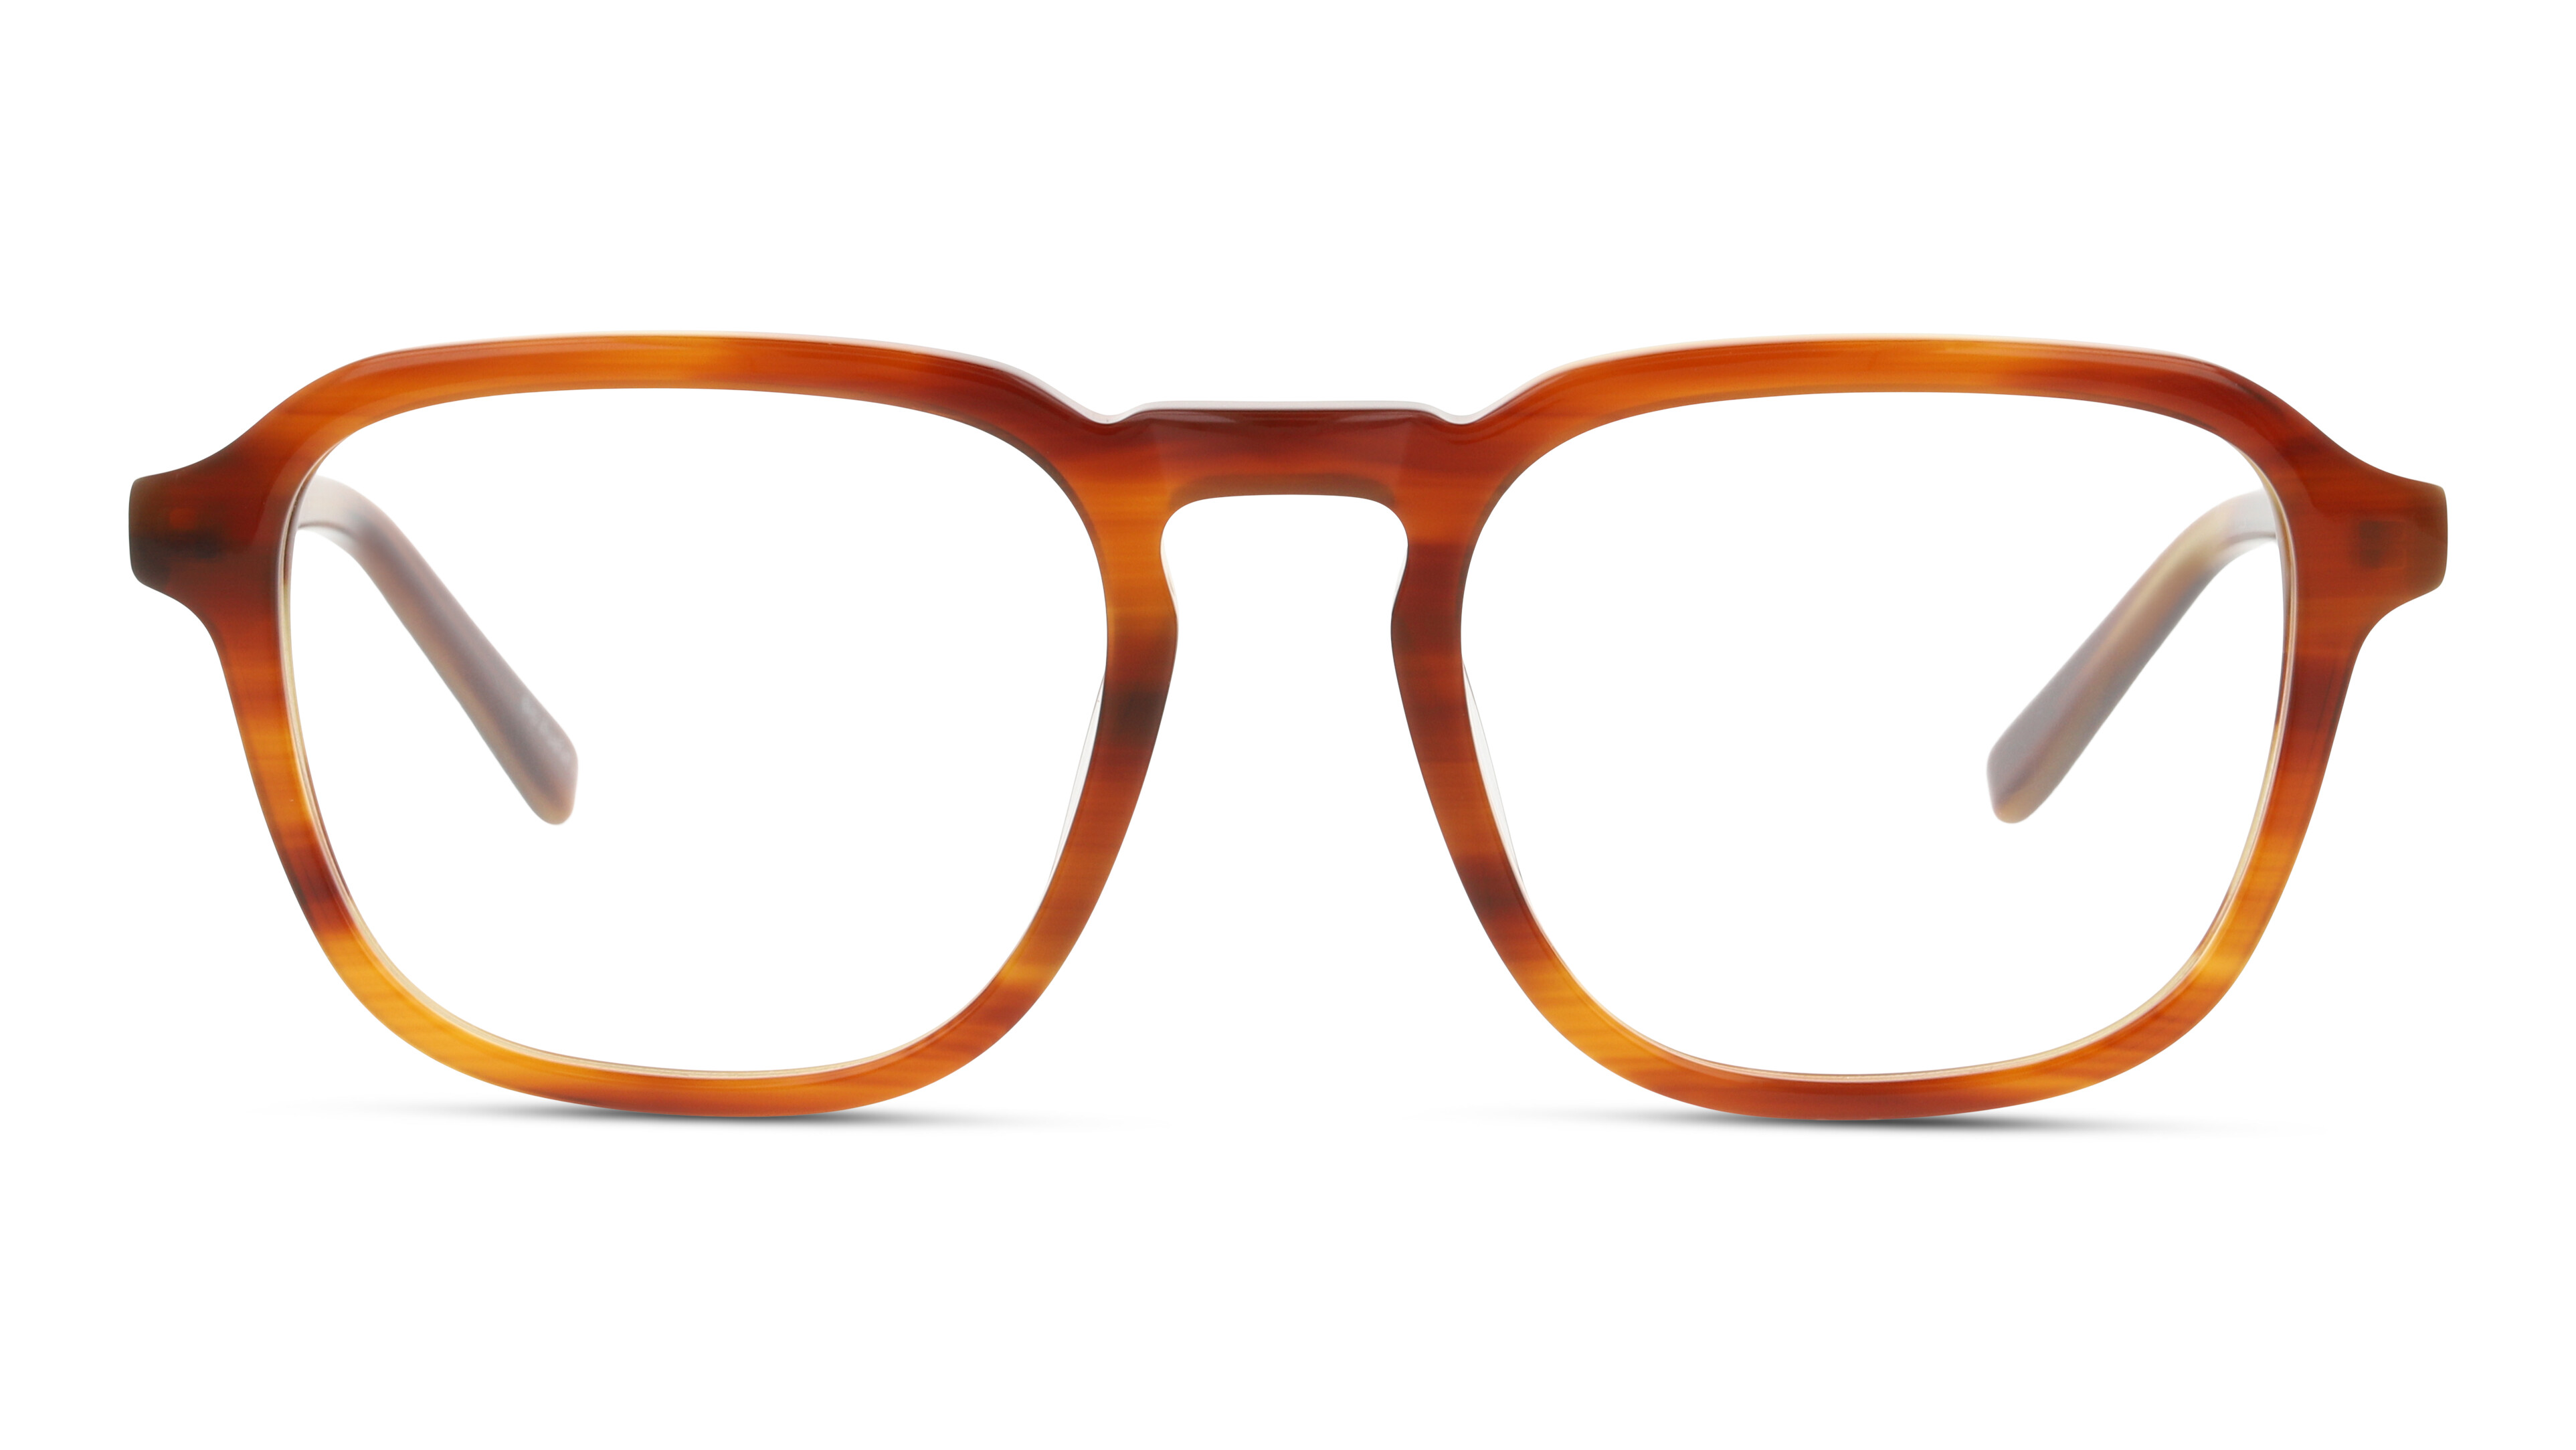 [products.image.front] DbyD DBOM5058 HO00 Brille